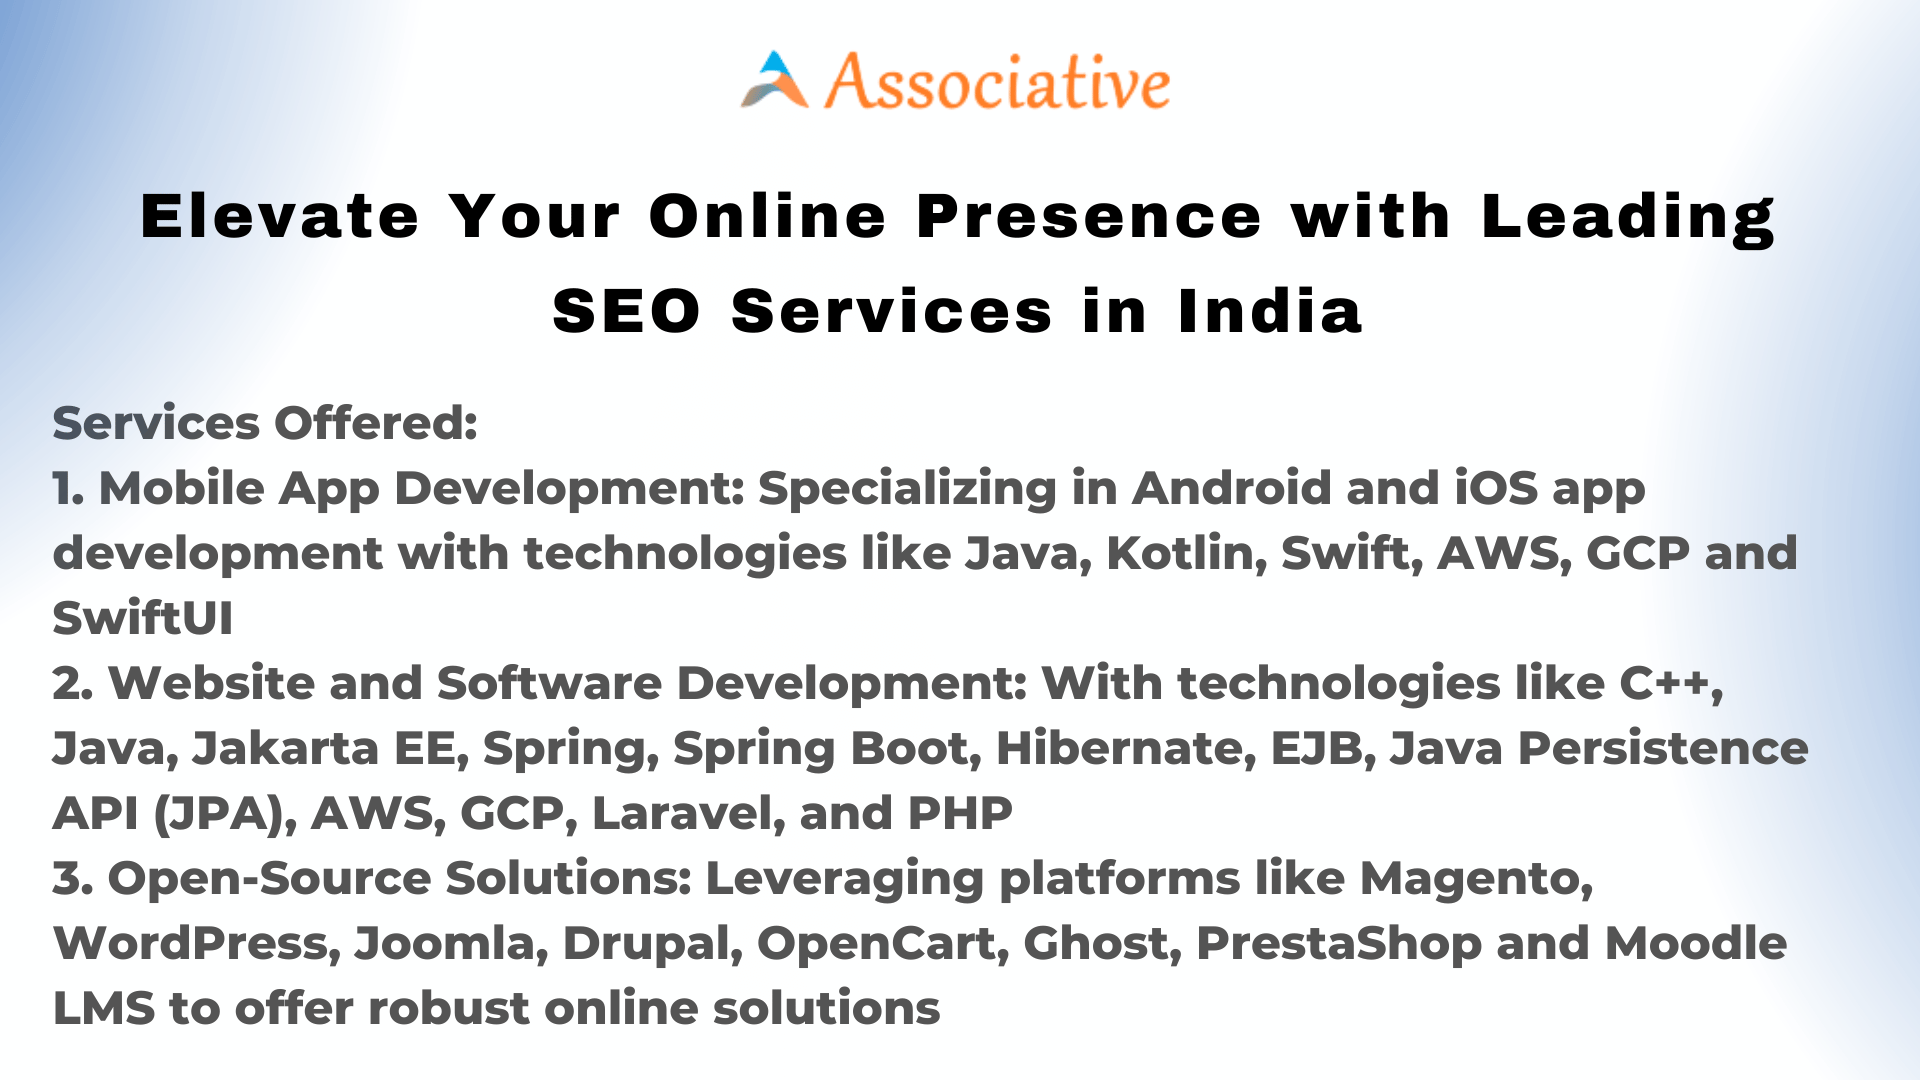 Elevate Your Online Presence with Leading SEO Services in India